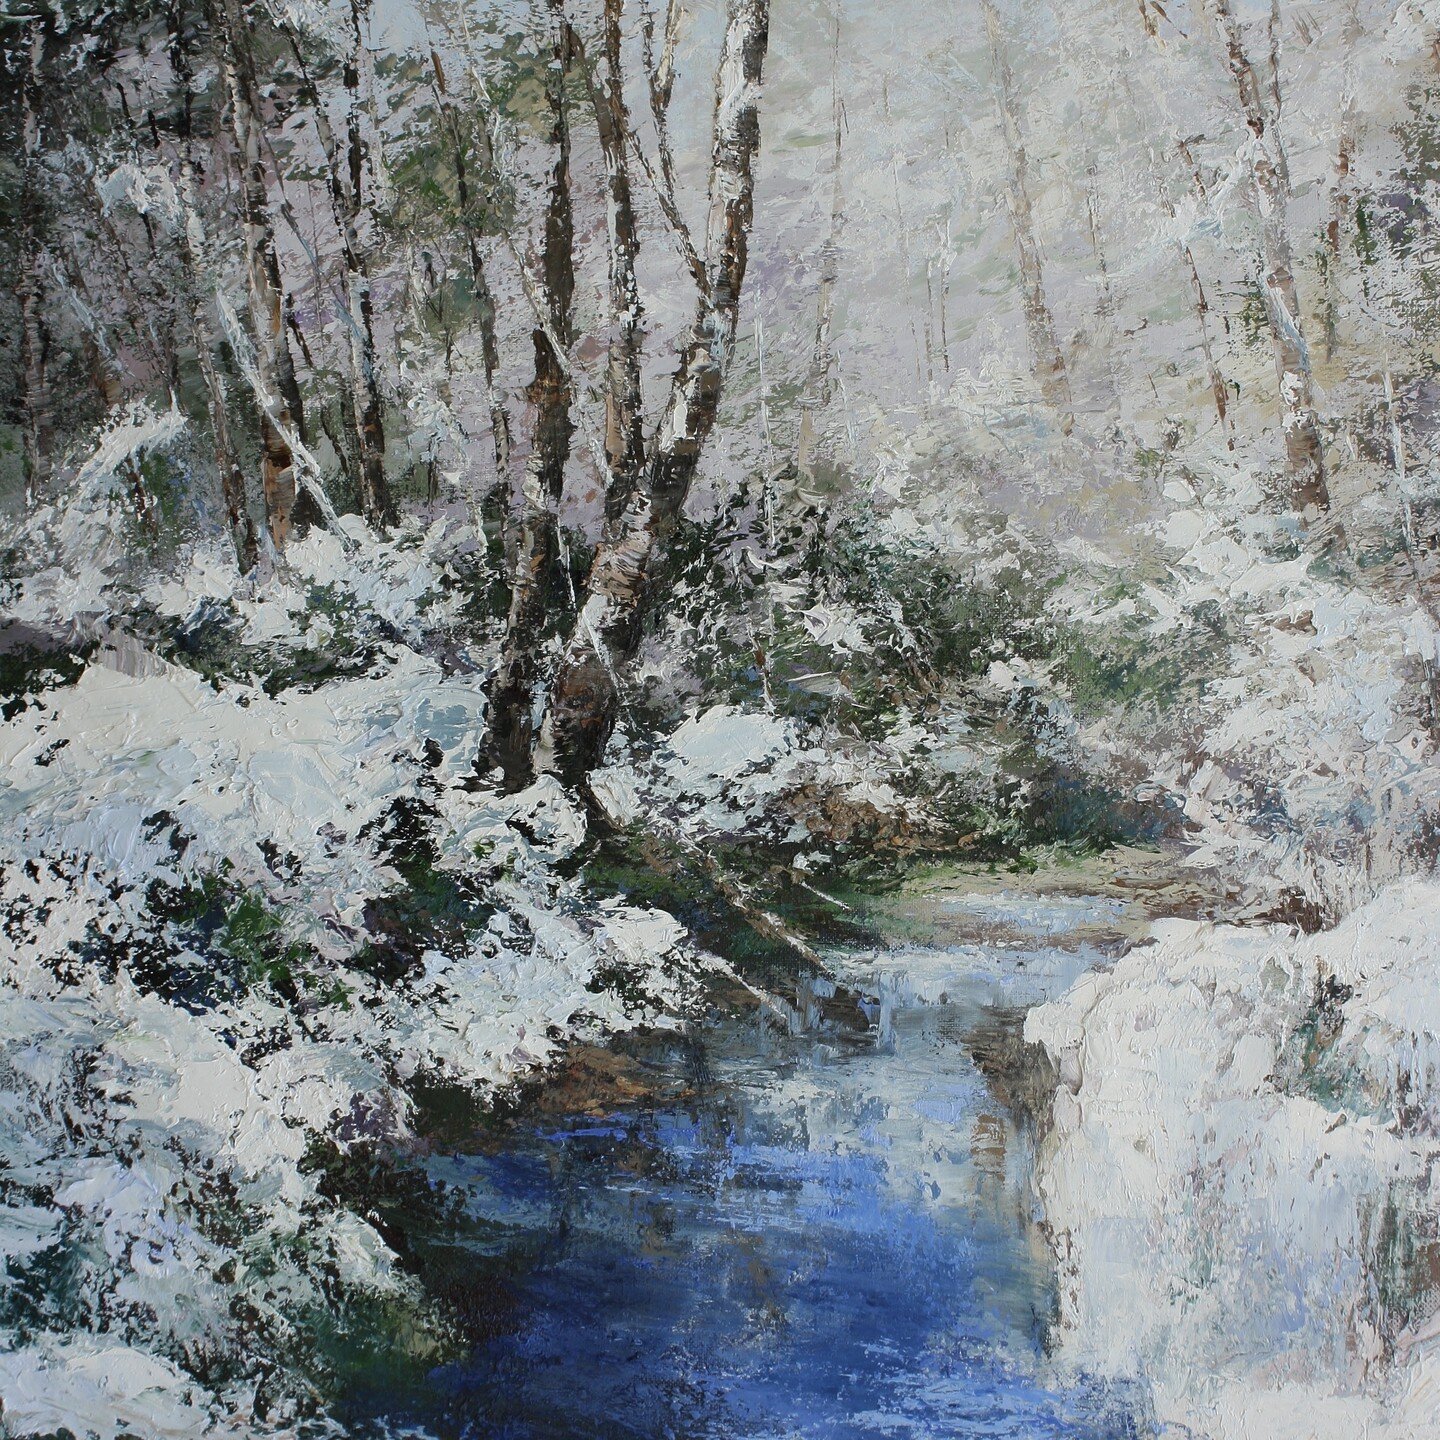 &quot;Quiet Days&quot; is an oil painting now showing in the Grace Mills River juried exhibition until January 11,2023.